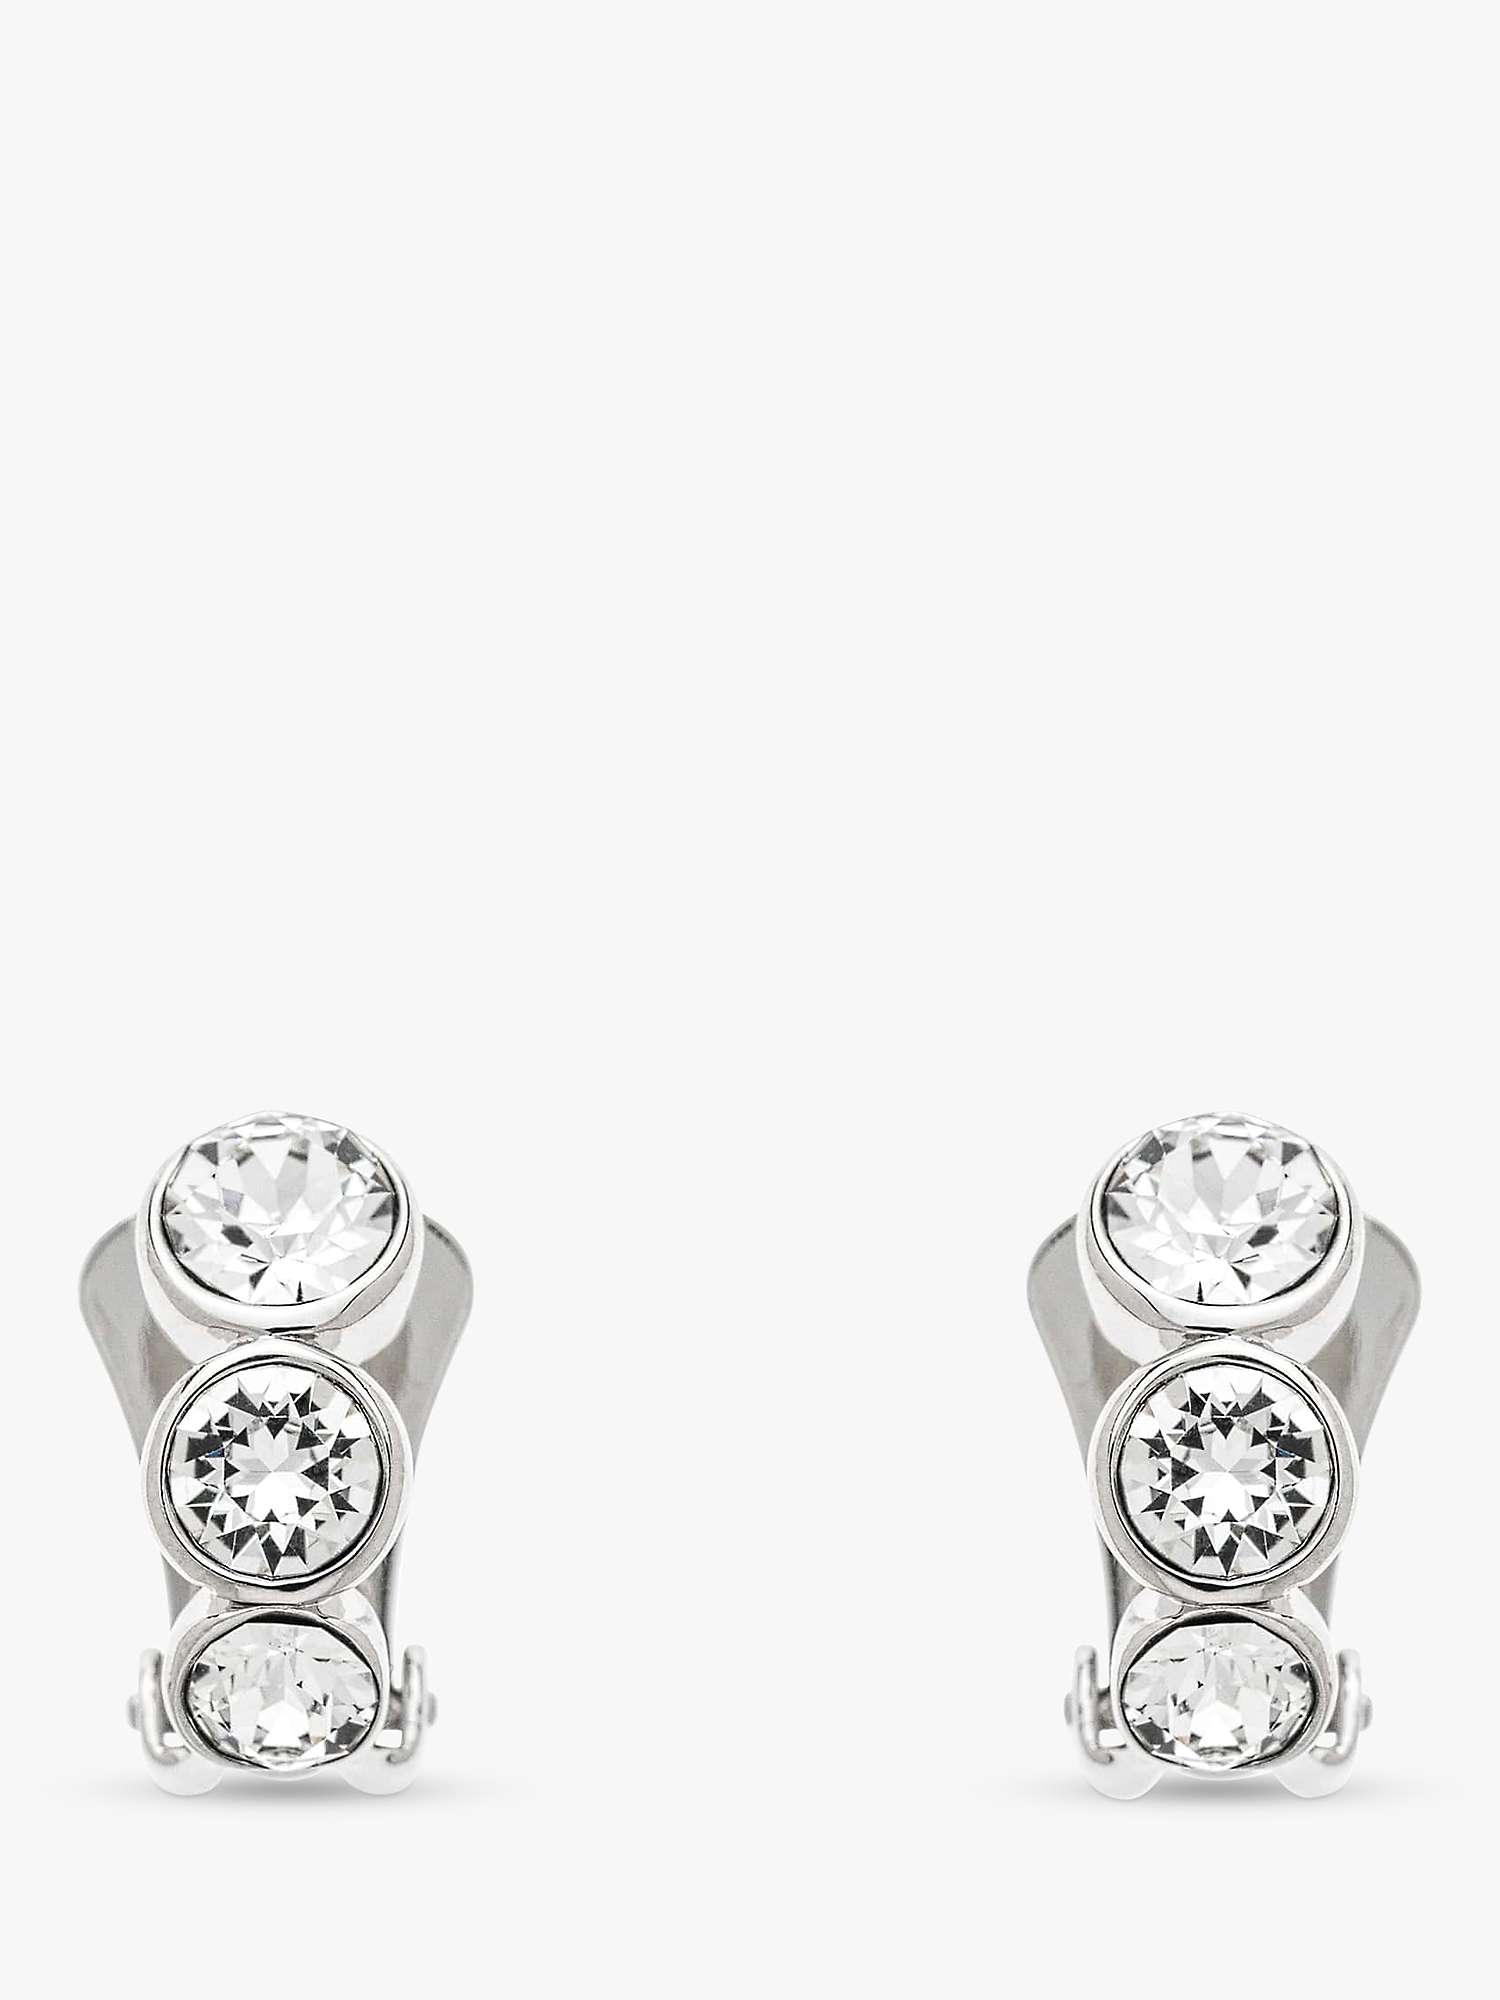 Buy Emma Holland Trio Crystal Clip-On Earrings, Silver Online at johnlewis.com